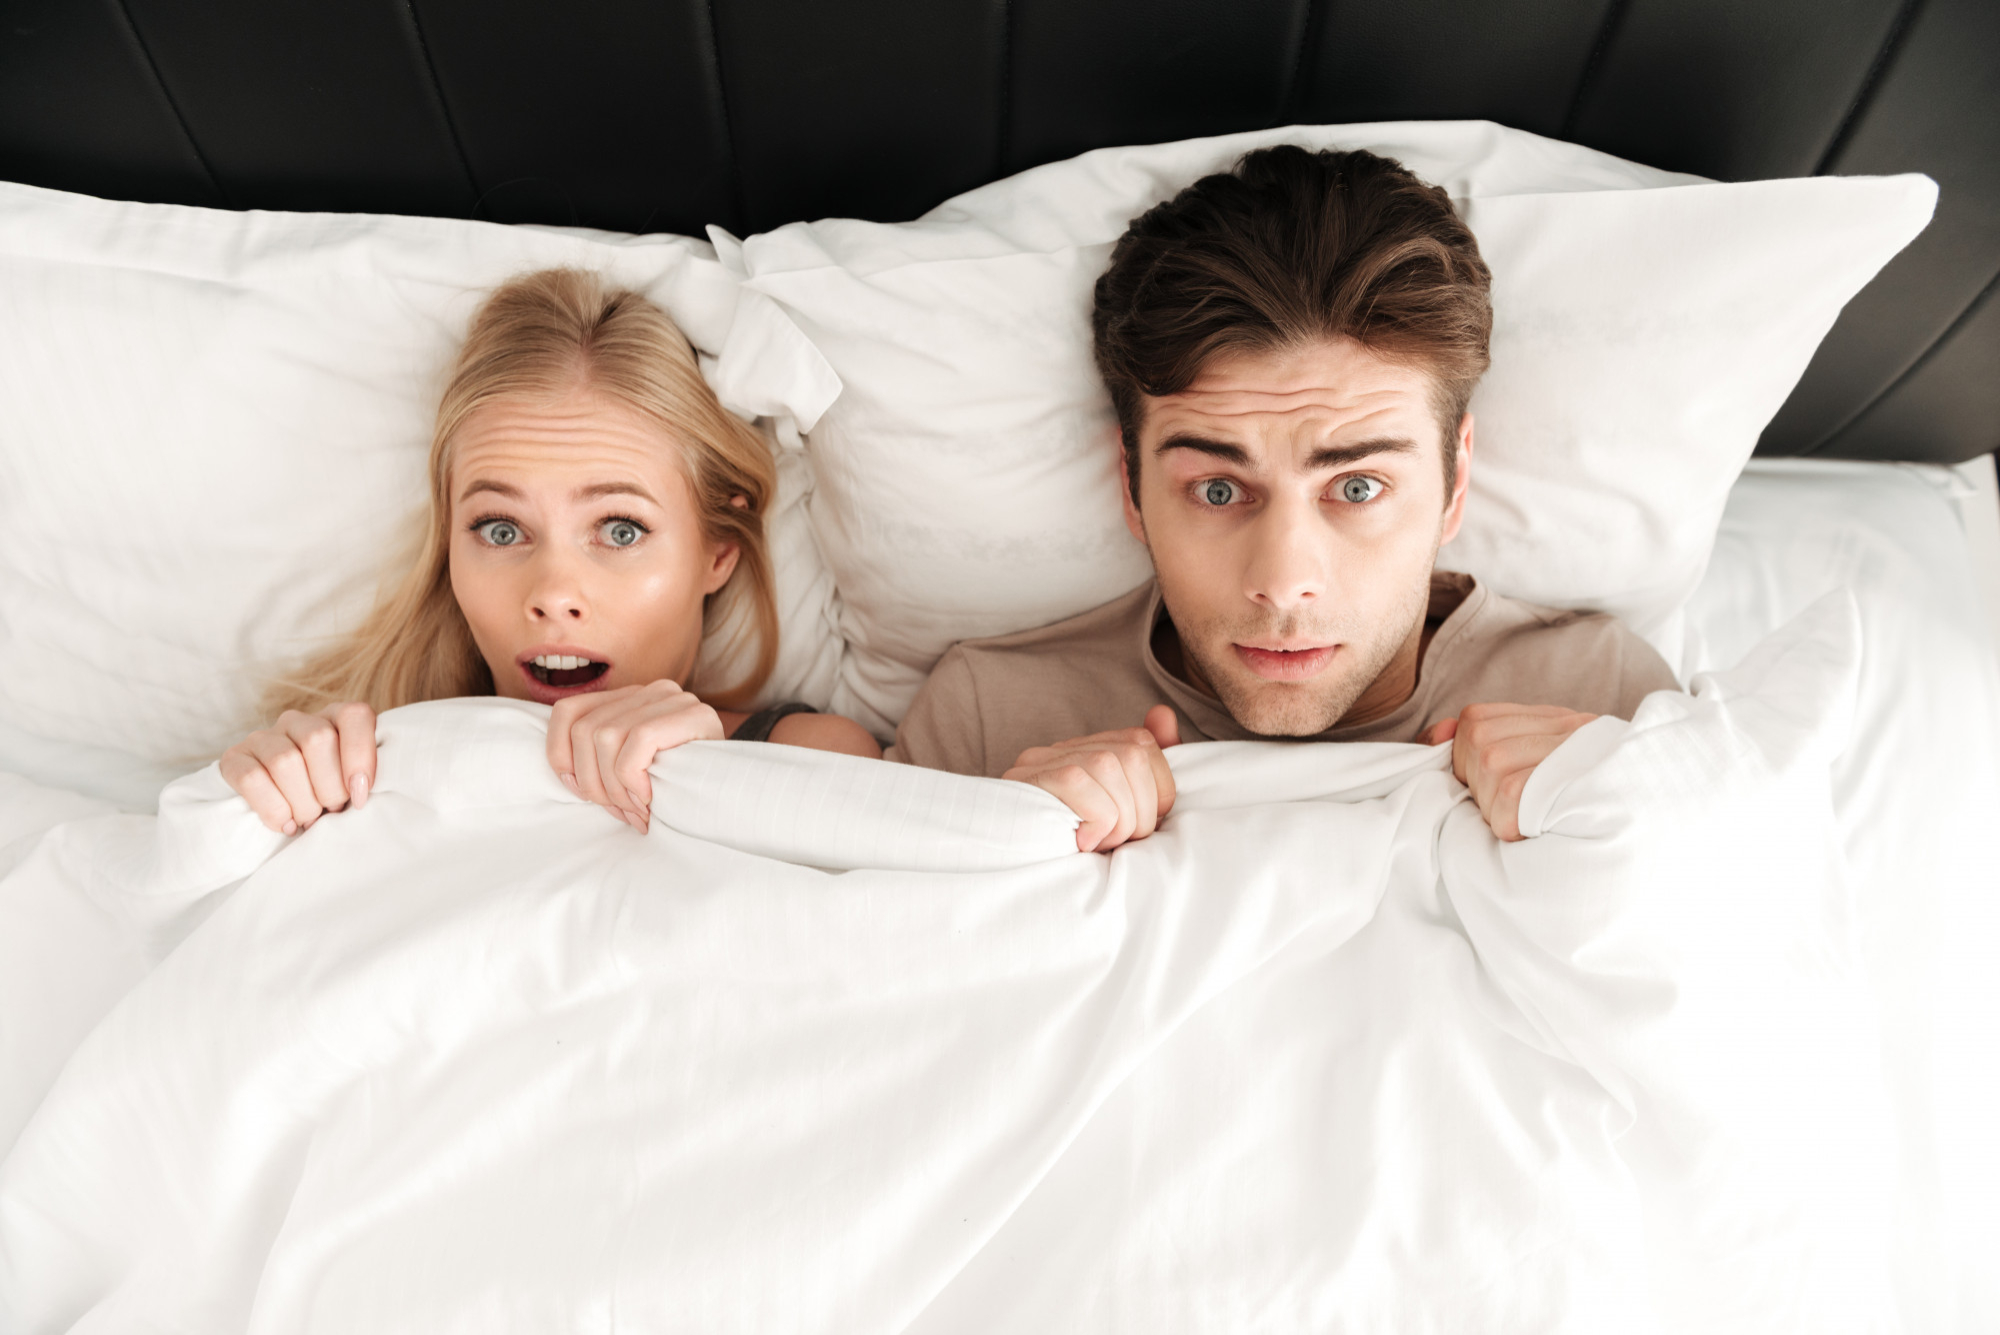 A couple caught in bed together | Source: Freepik